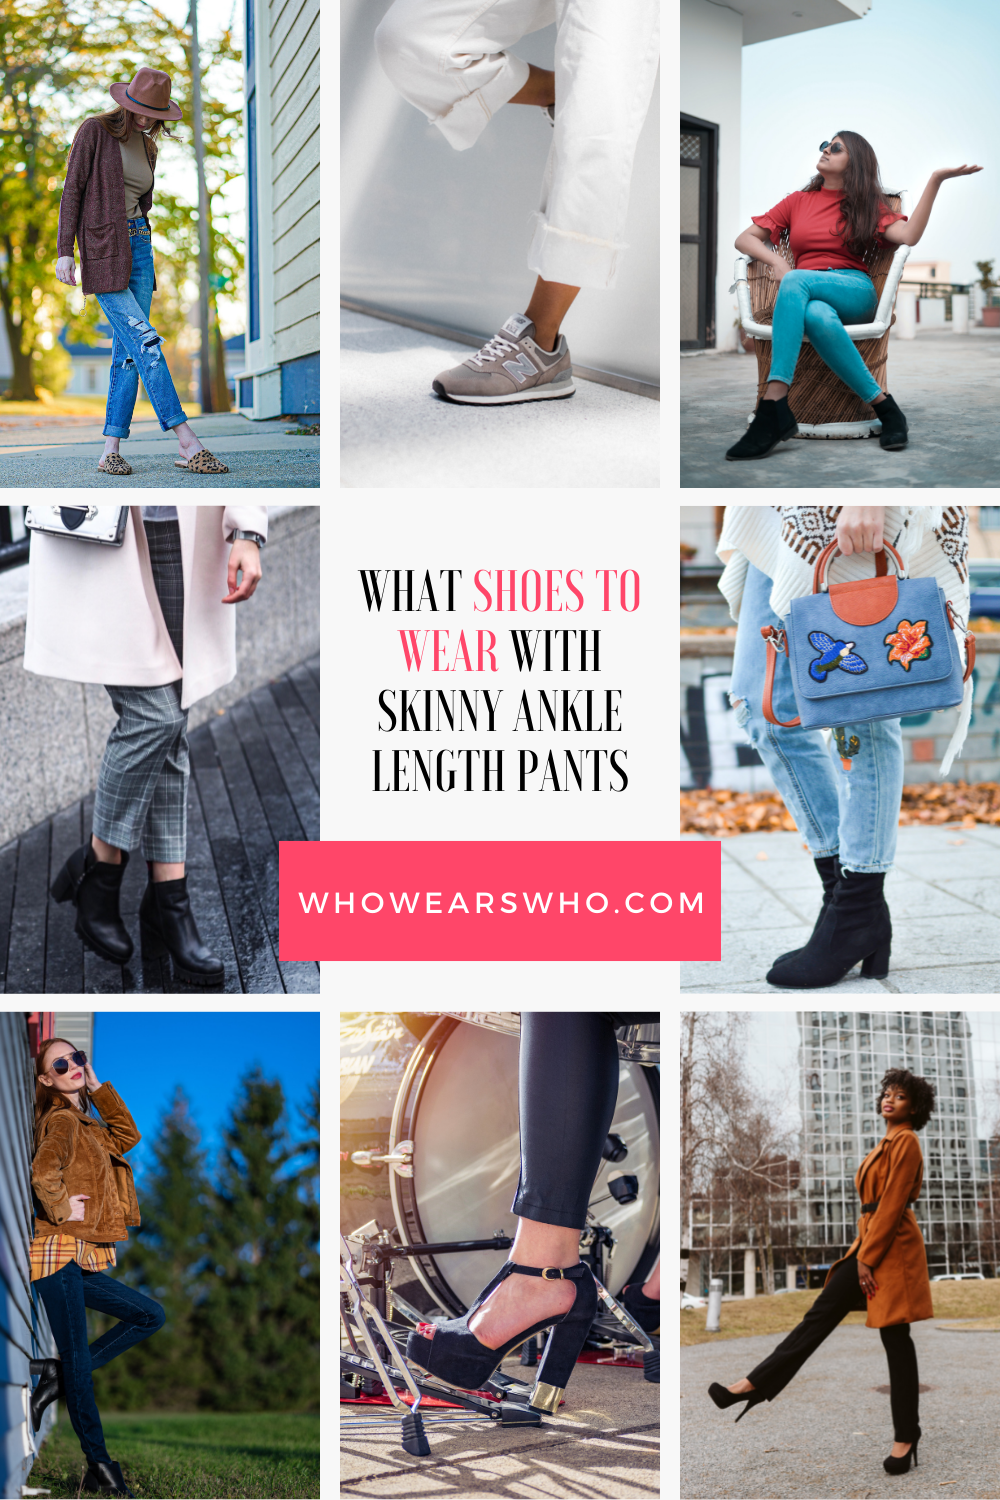 What shoes to wear with skinny ankle length pants Examples